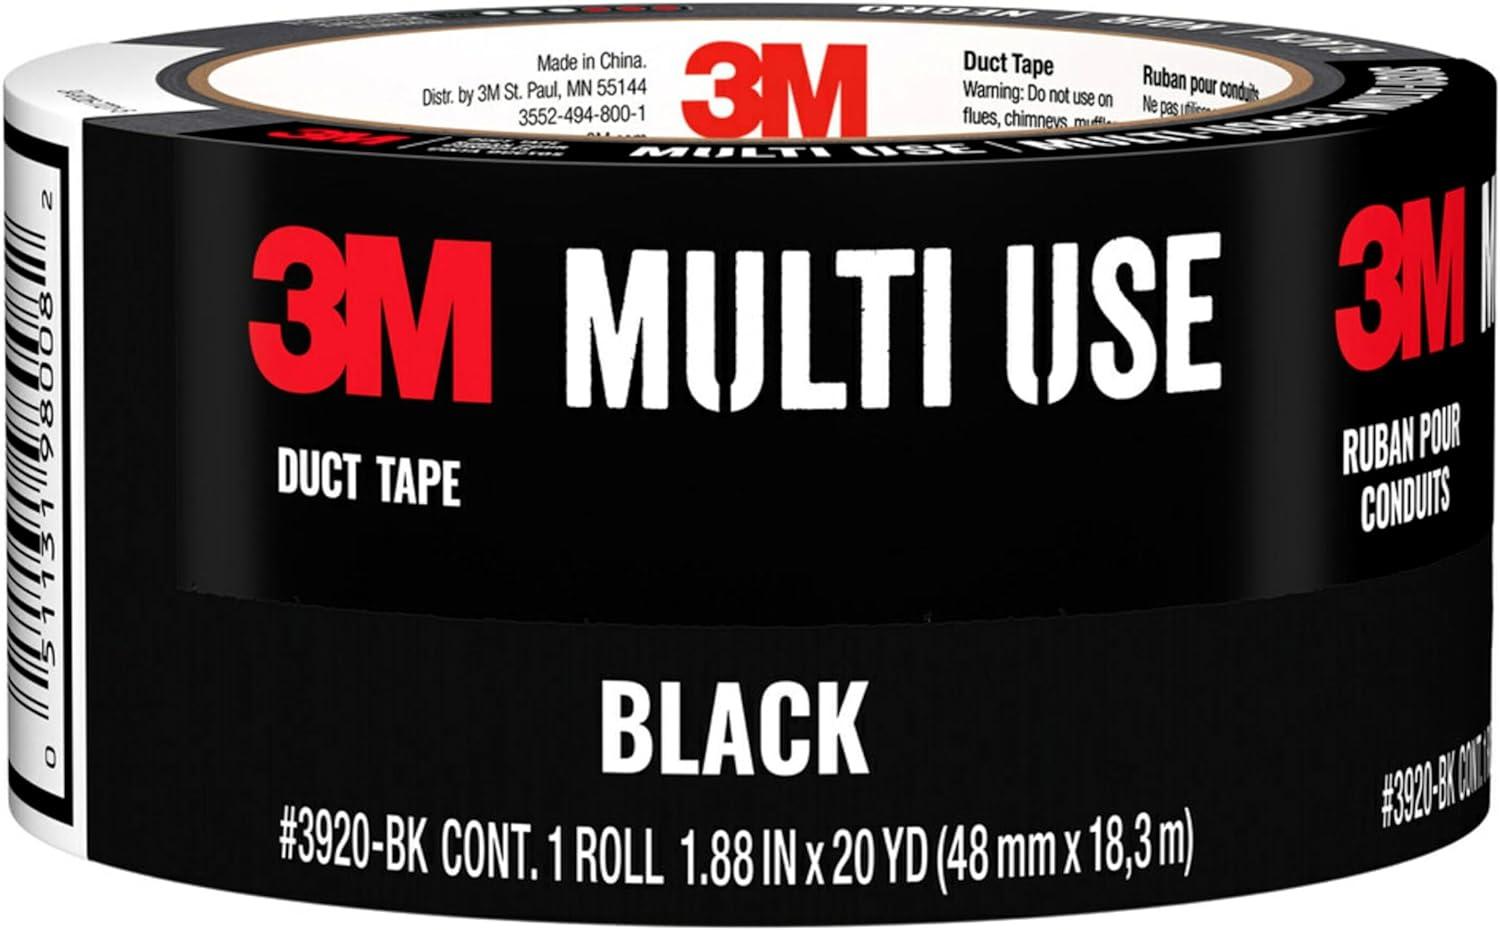 3m multi-use colored duct tape black 1 88 inches by 20 yards 3920-bk 1 roll  3m b0013ax67a